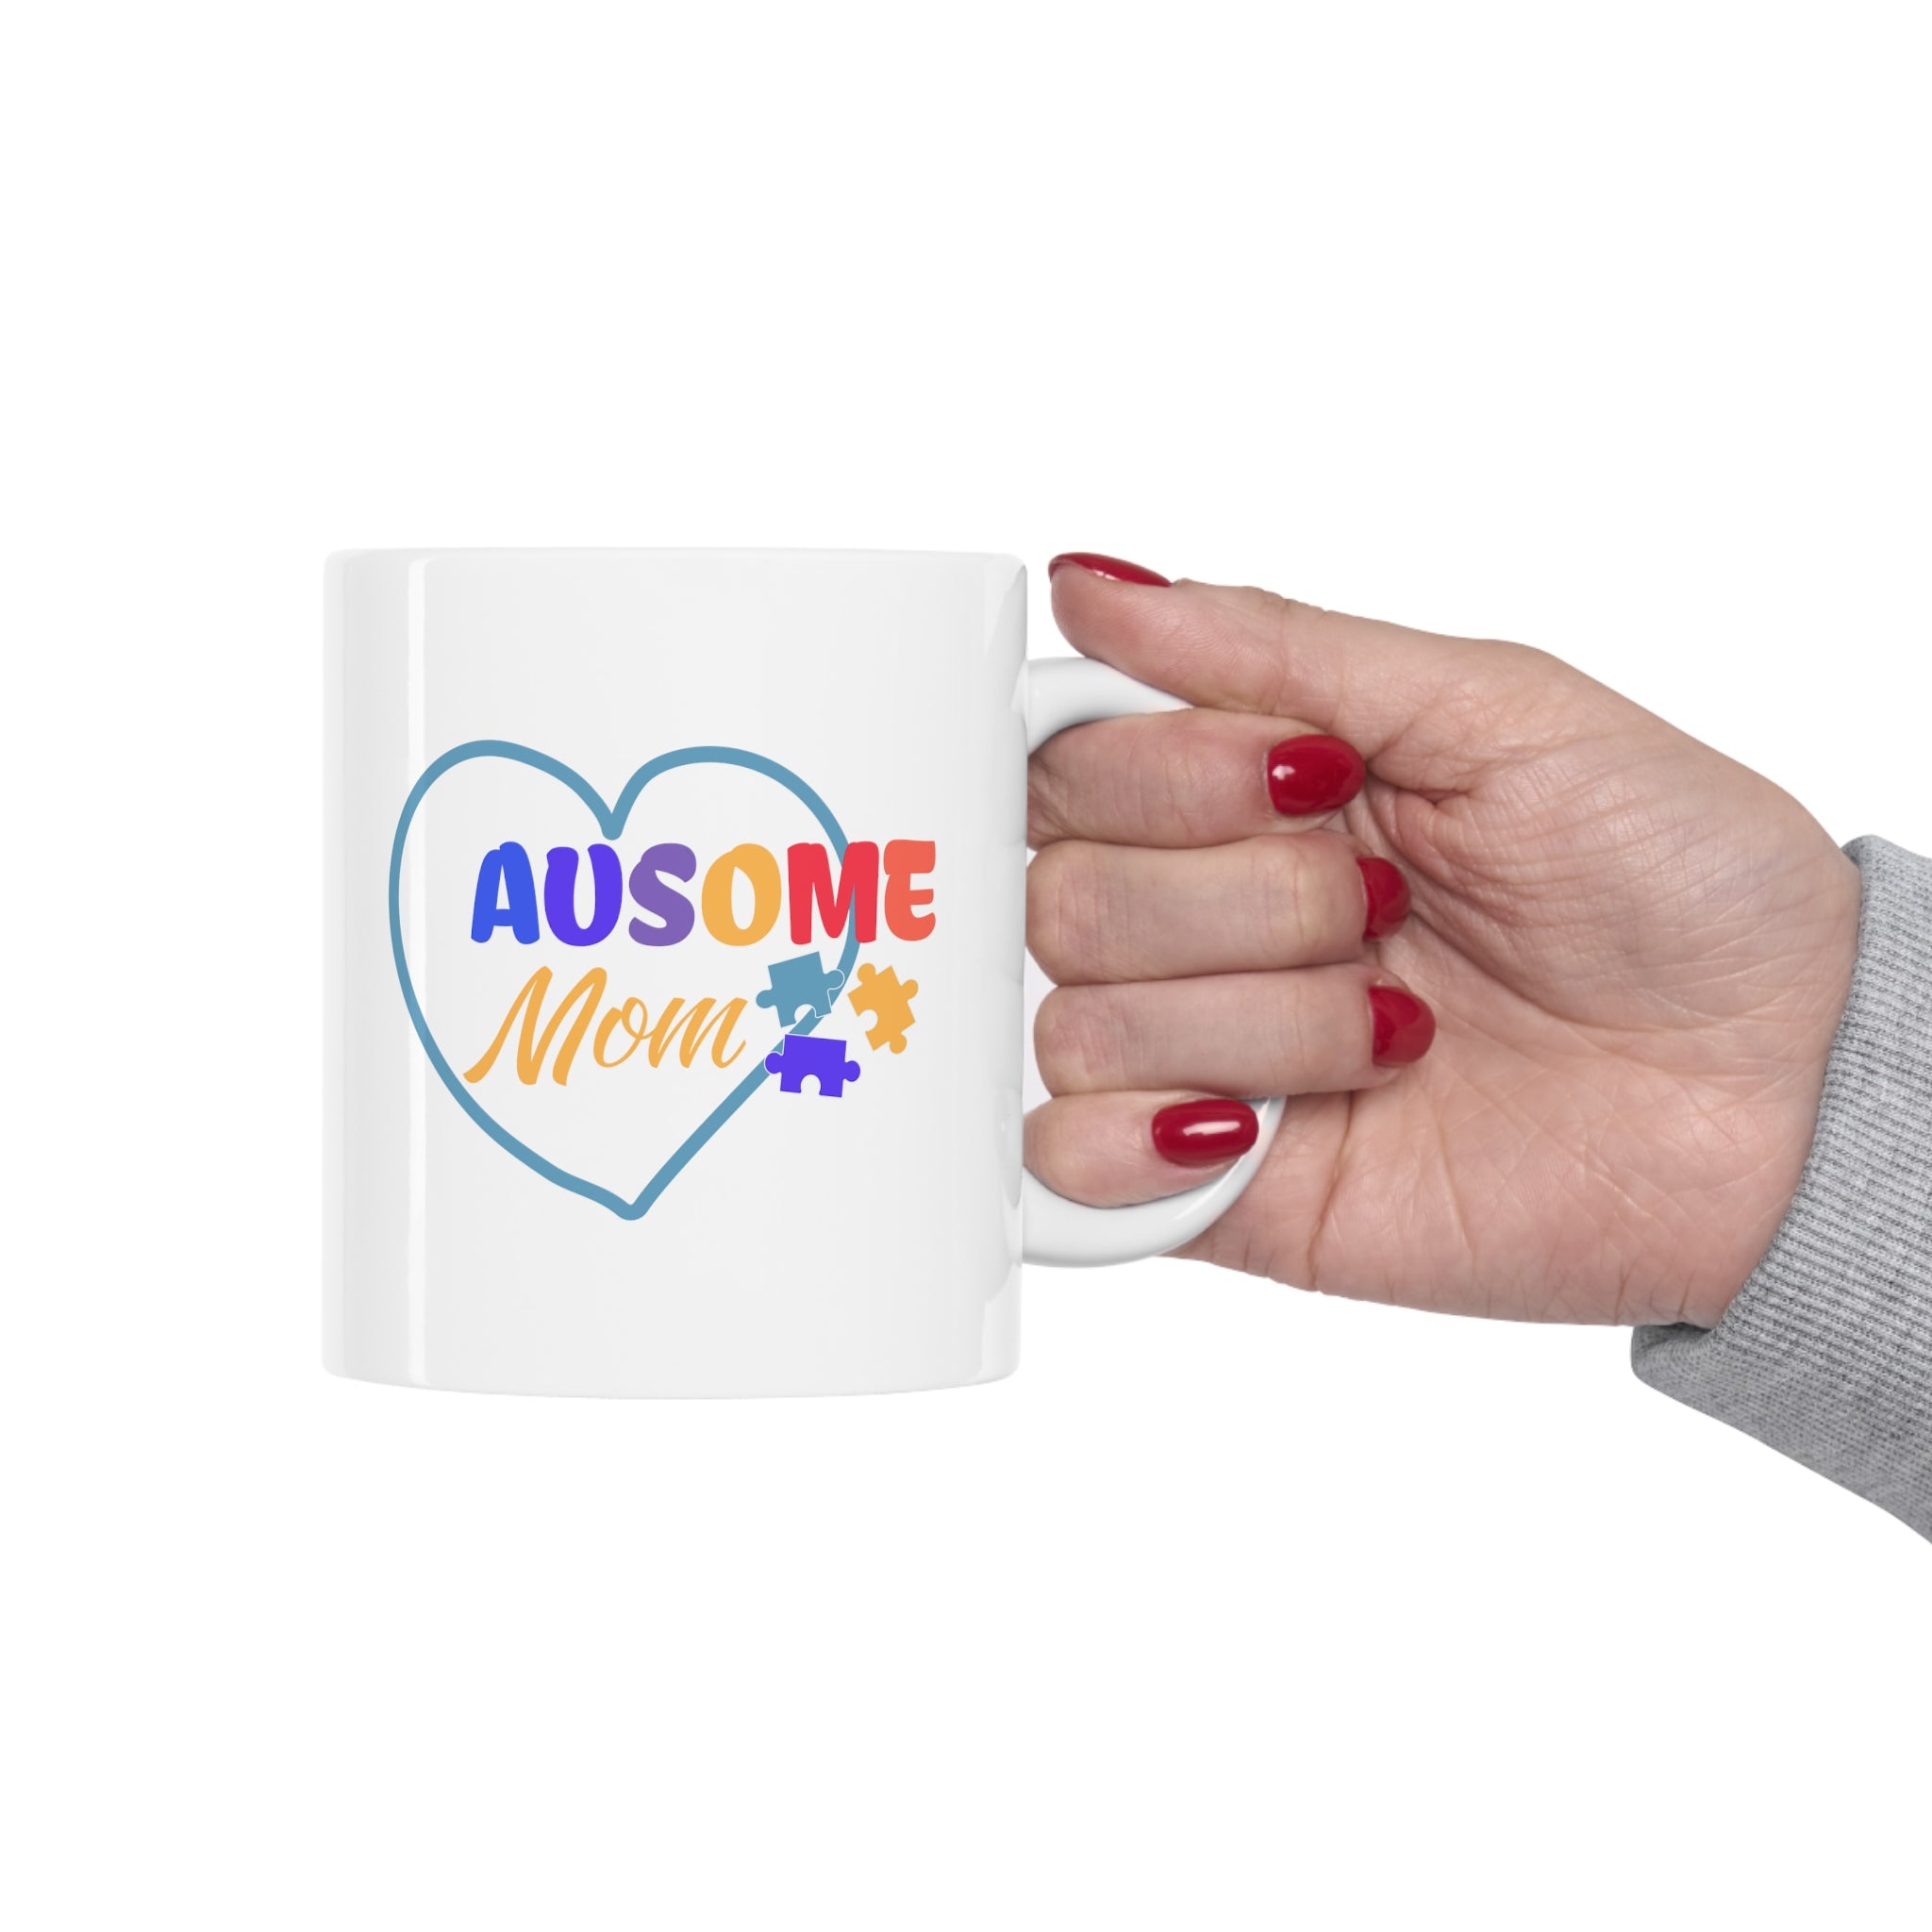 "Ausome Mom" Autism Awareness and Support Ceramic Mug 11oz - Celebrating the Strength and Love of Amazing Mothers: A Heartfelt Homage to Autism Advocacy